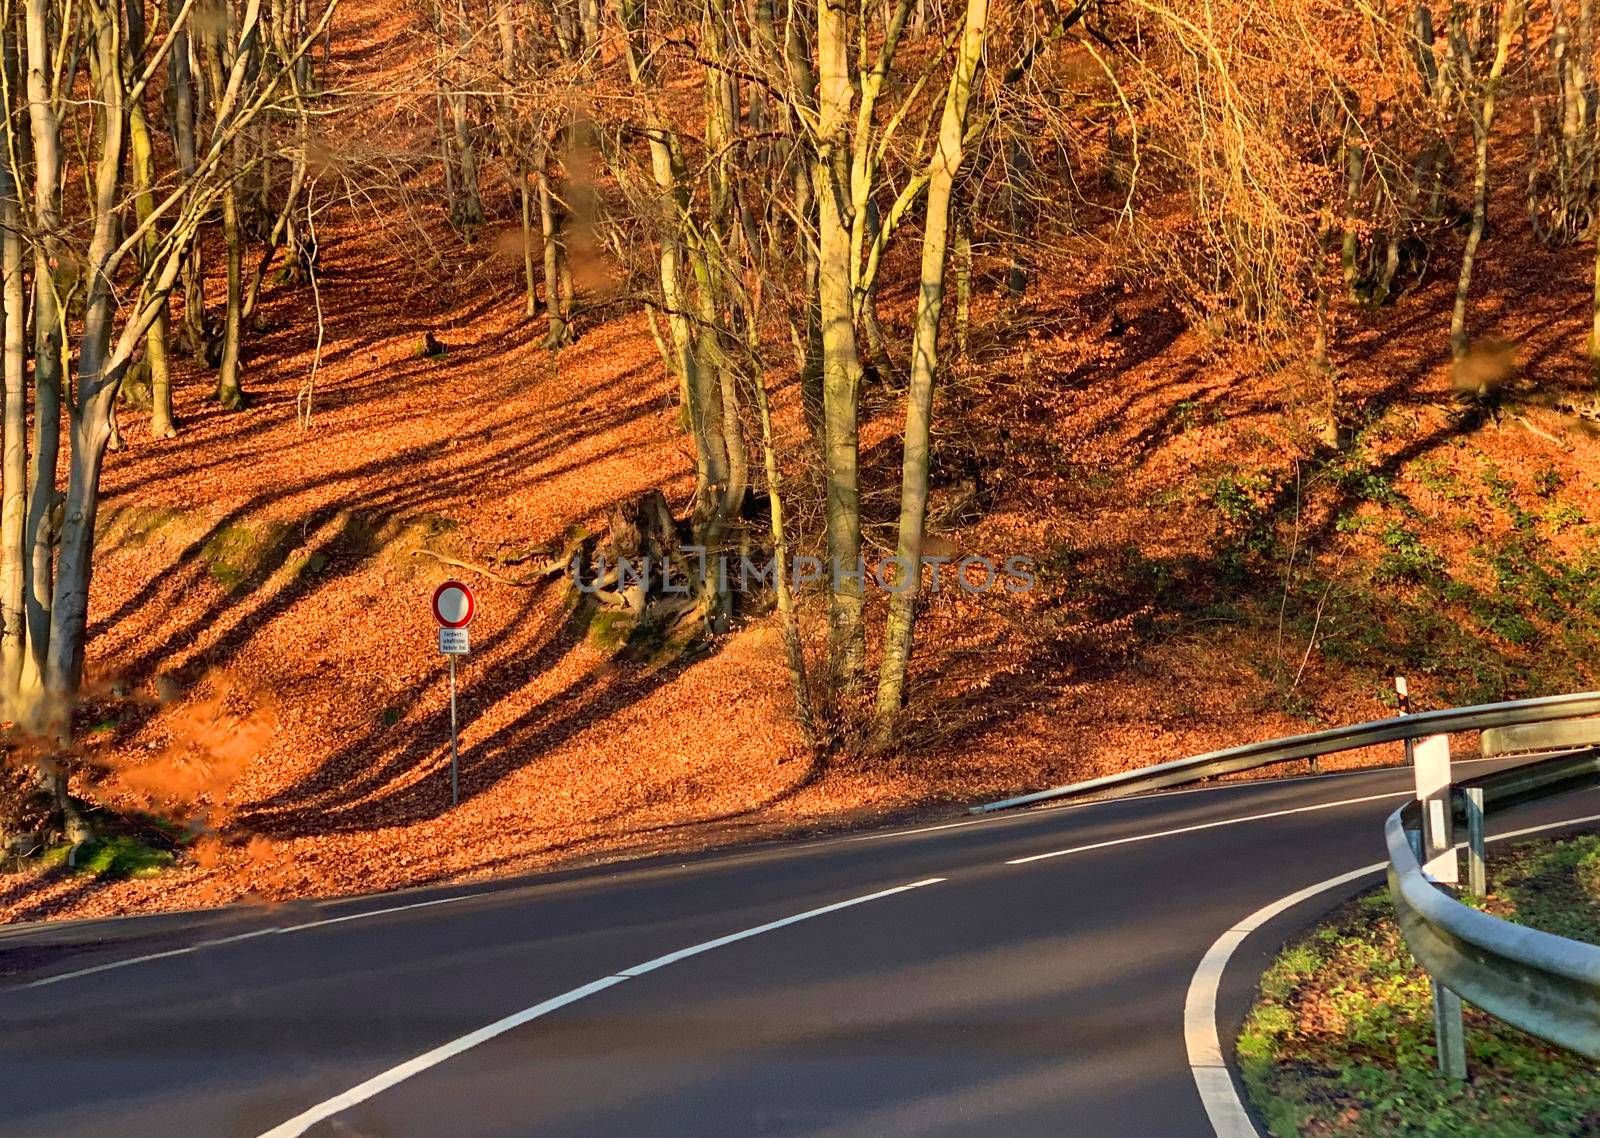 Road winding through hills with bare trees by WielandTeixeira